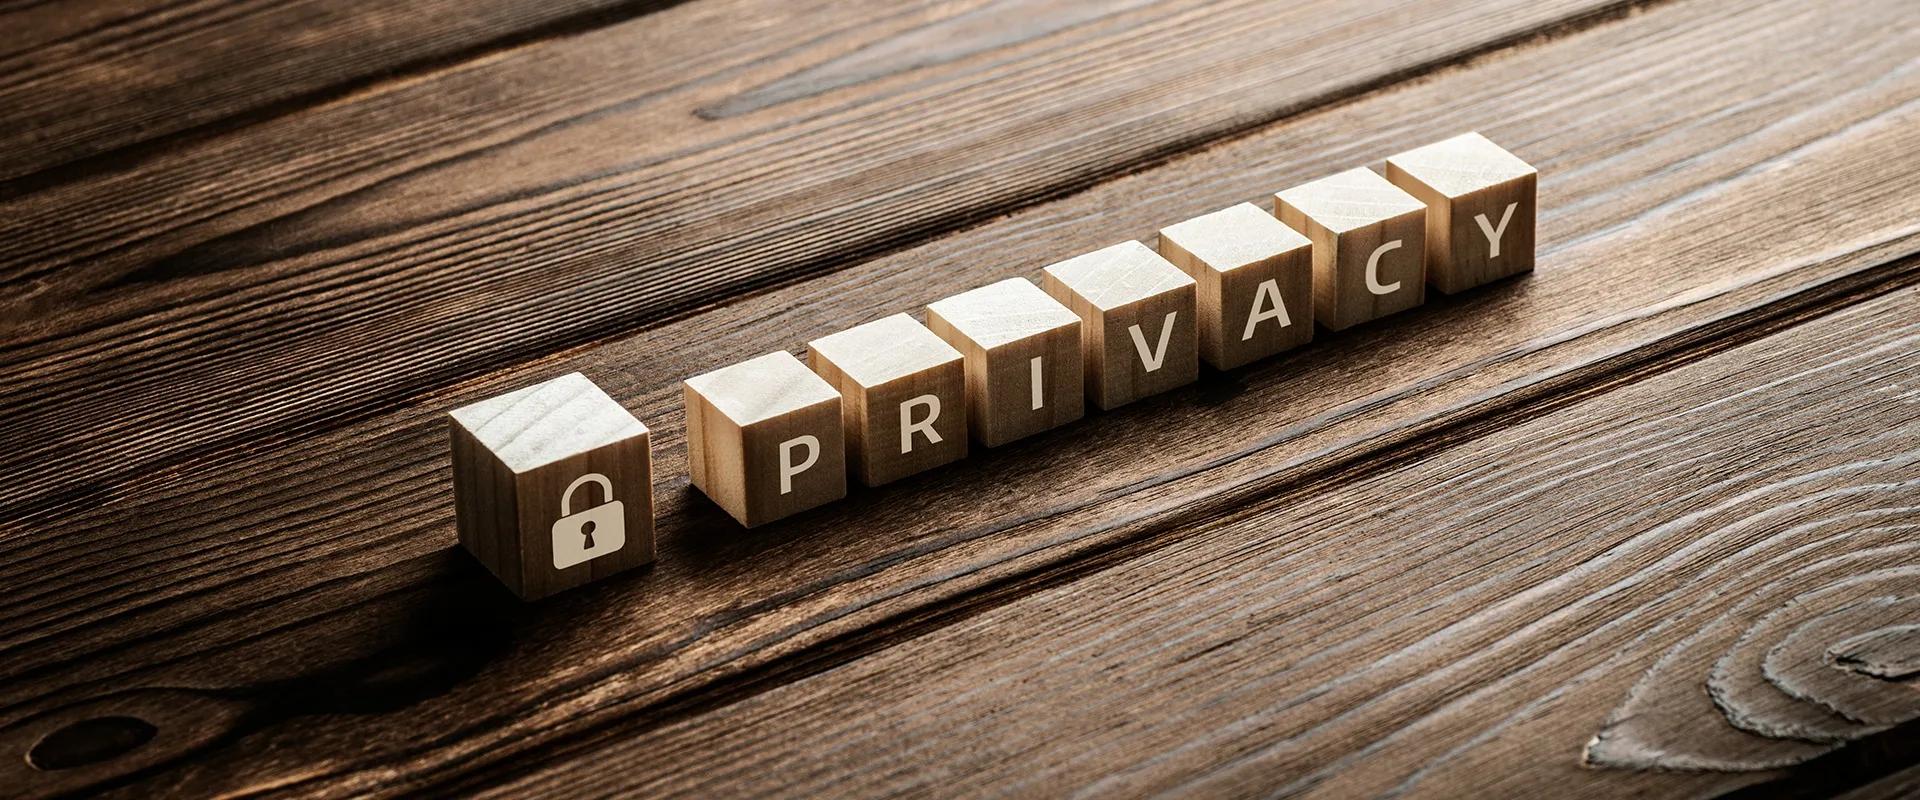 An exploration of the increasing significance of privacy in today's digital world, emphasizing the need to safeguard personal information and protect autonomy.